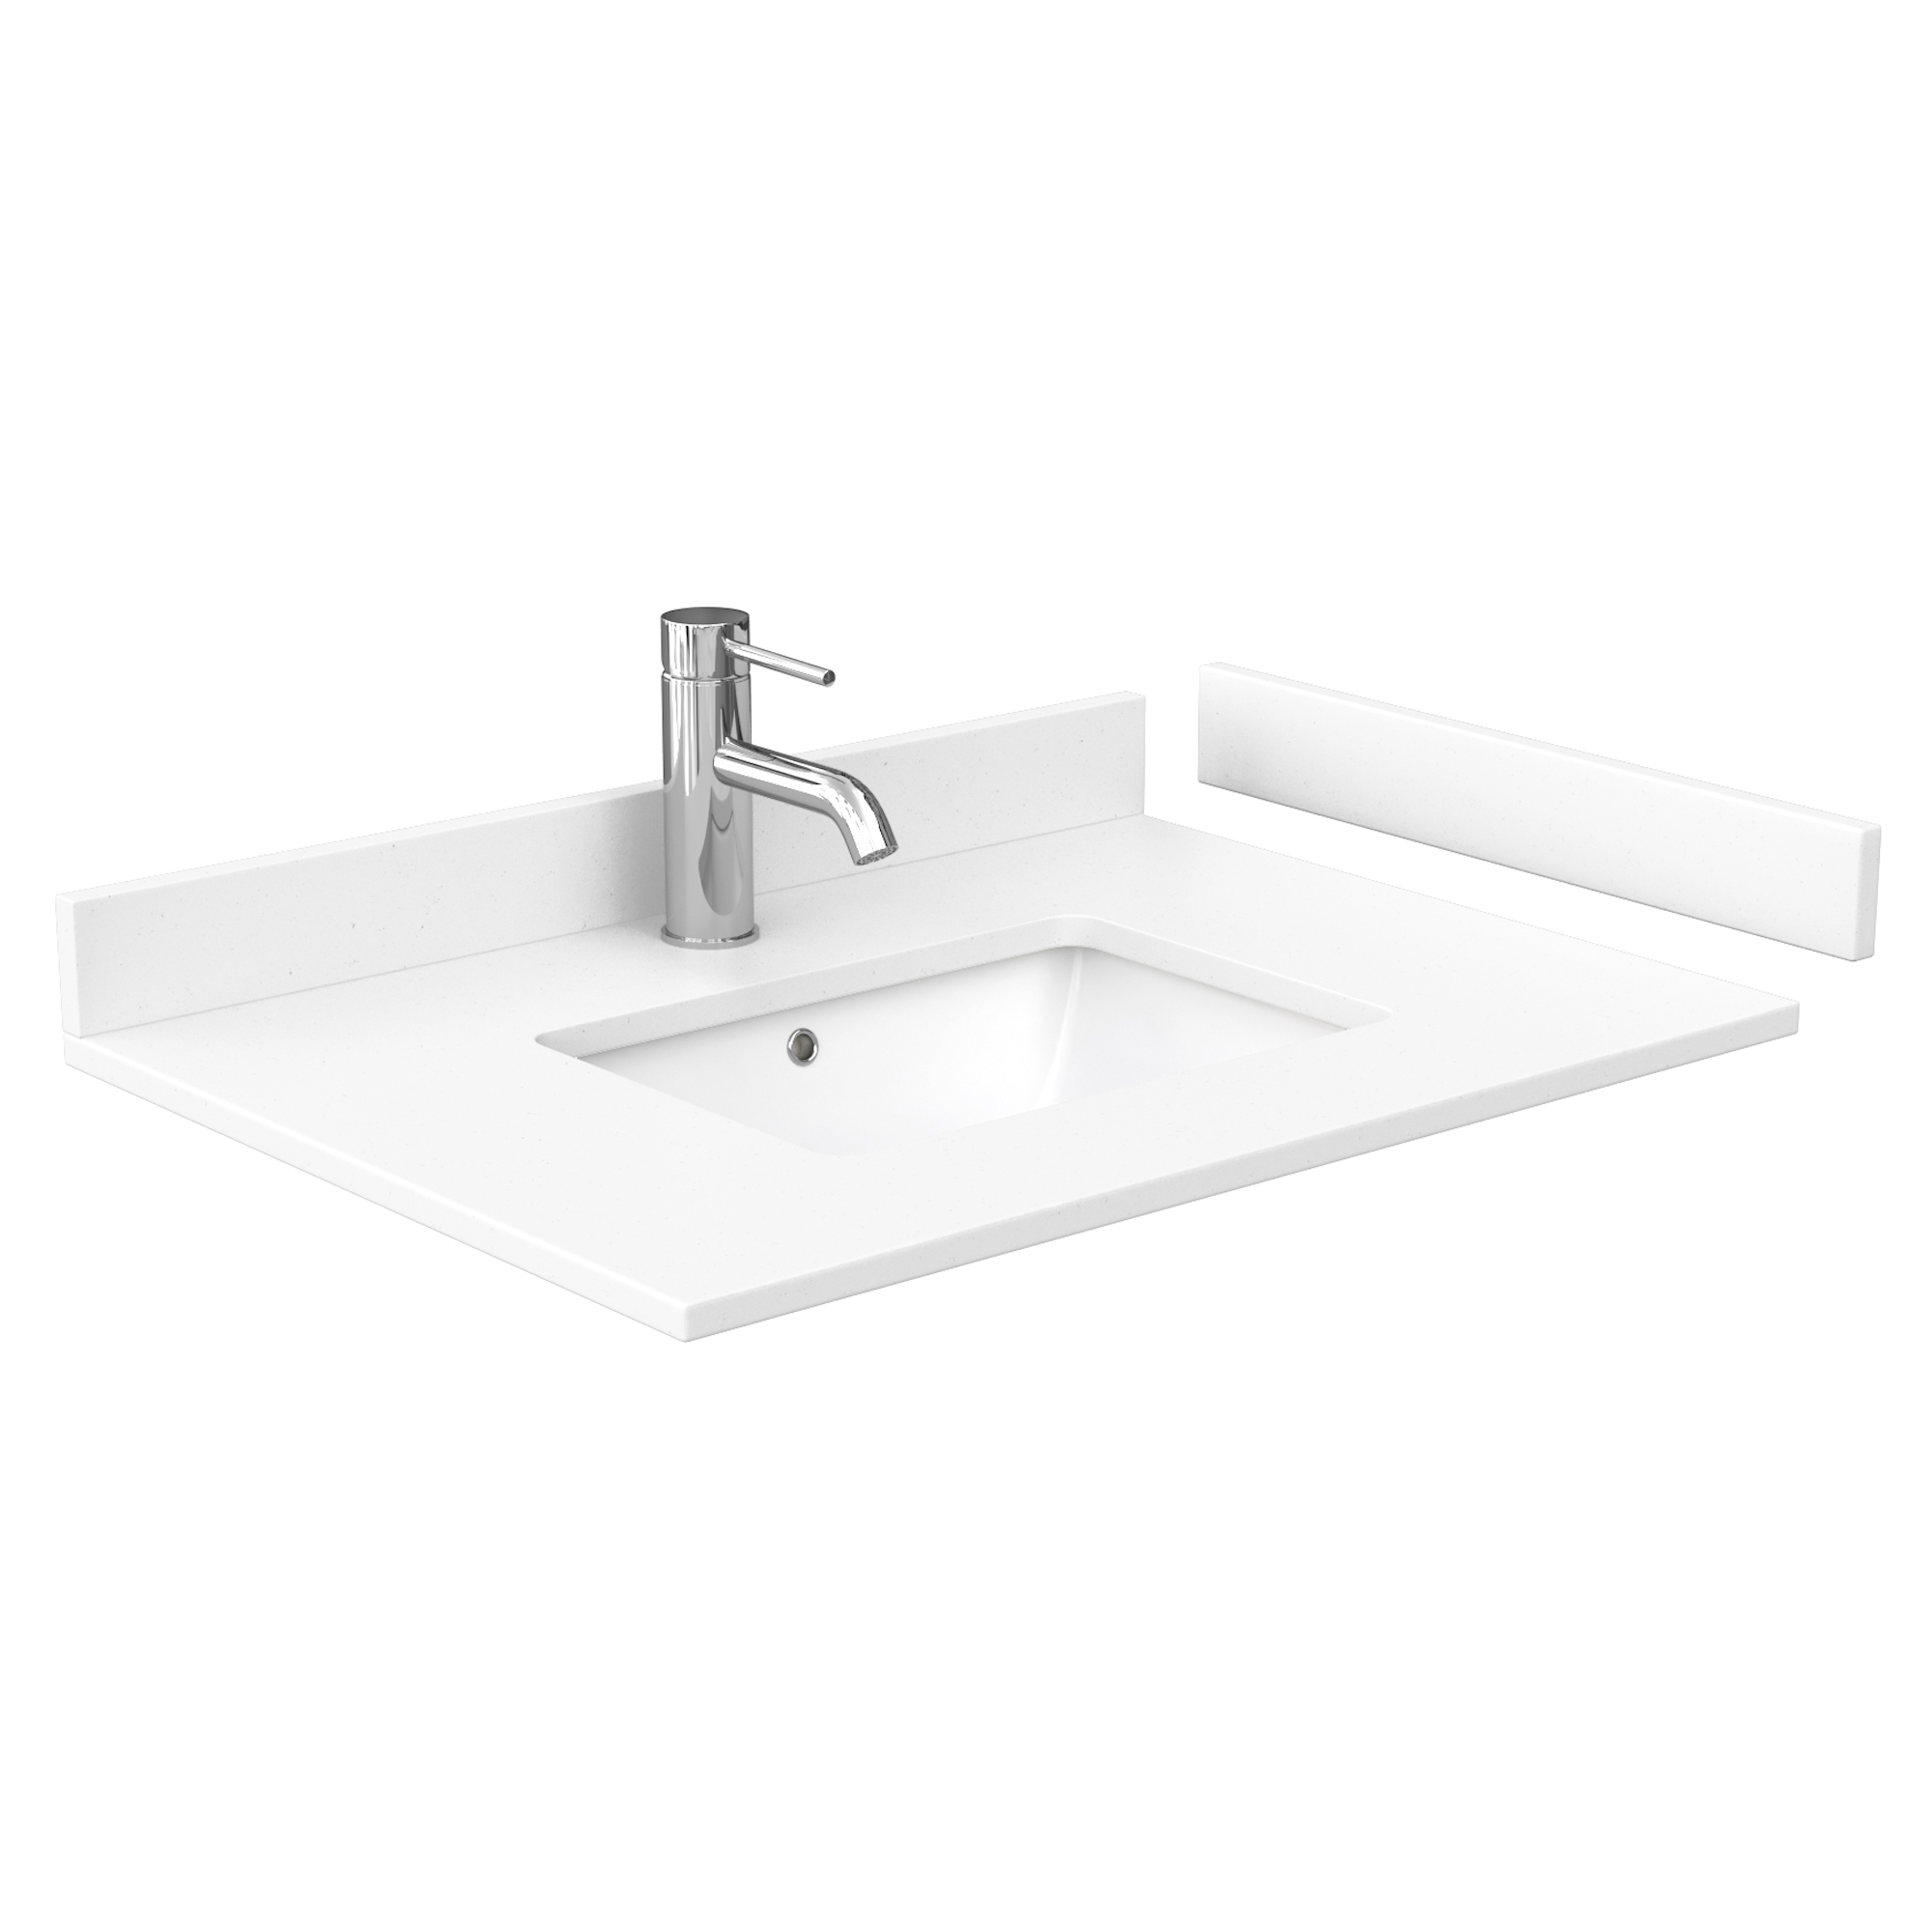 30" Single Countertop - White Cultured Marble with Undermount Square Sink - Include Backsplash and Sidesplash WC-VCA-30-SGL-TOP-UMSQ-WHC